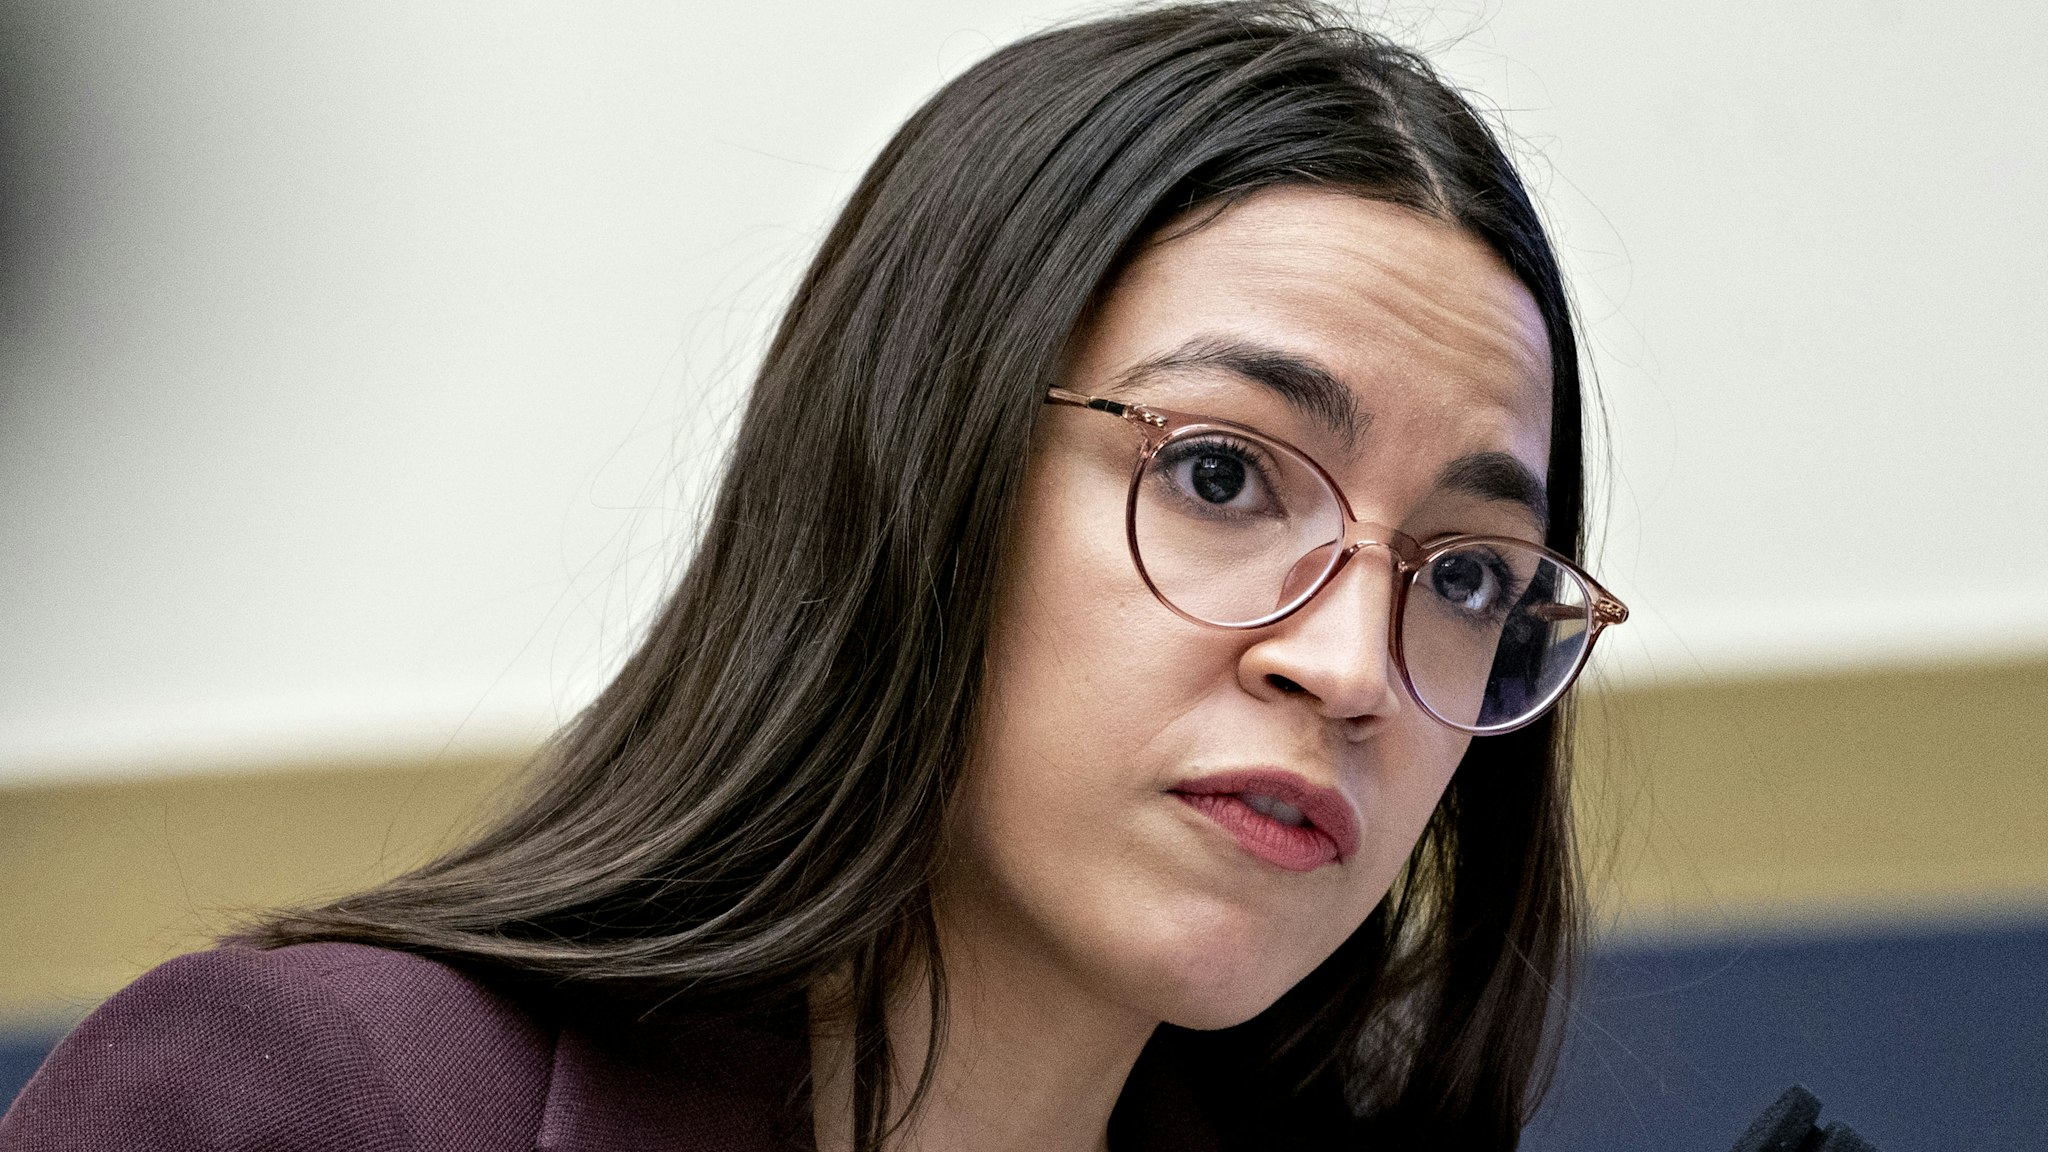 Representative Alexandria Ocasio-Cortez, a Democrat from New York, questions Steven Mnuchin, U.S. Treasury secretary, not pictured, during a House Financial Services Committee hearing in Washington, D.C., U.S., on Thursday, Dec. 5, 2019. Mnuchin said he and the Federal Reserve Chairman dont expect the U.S. to create a digital currency.